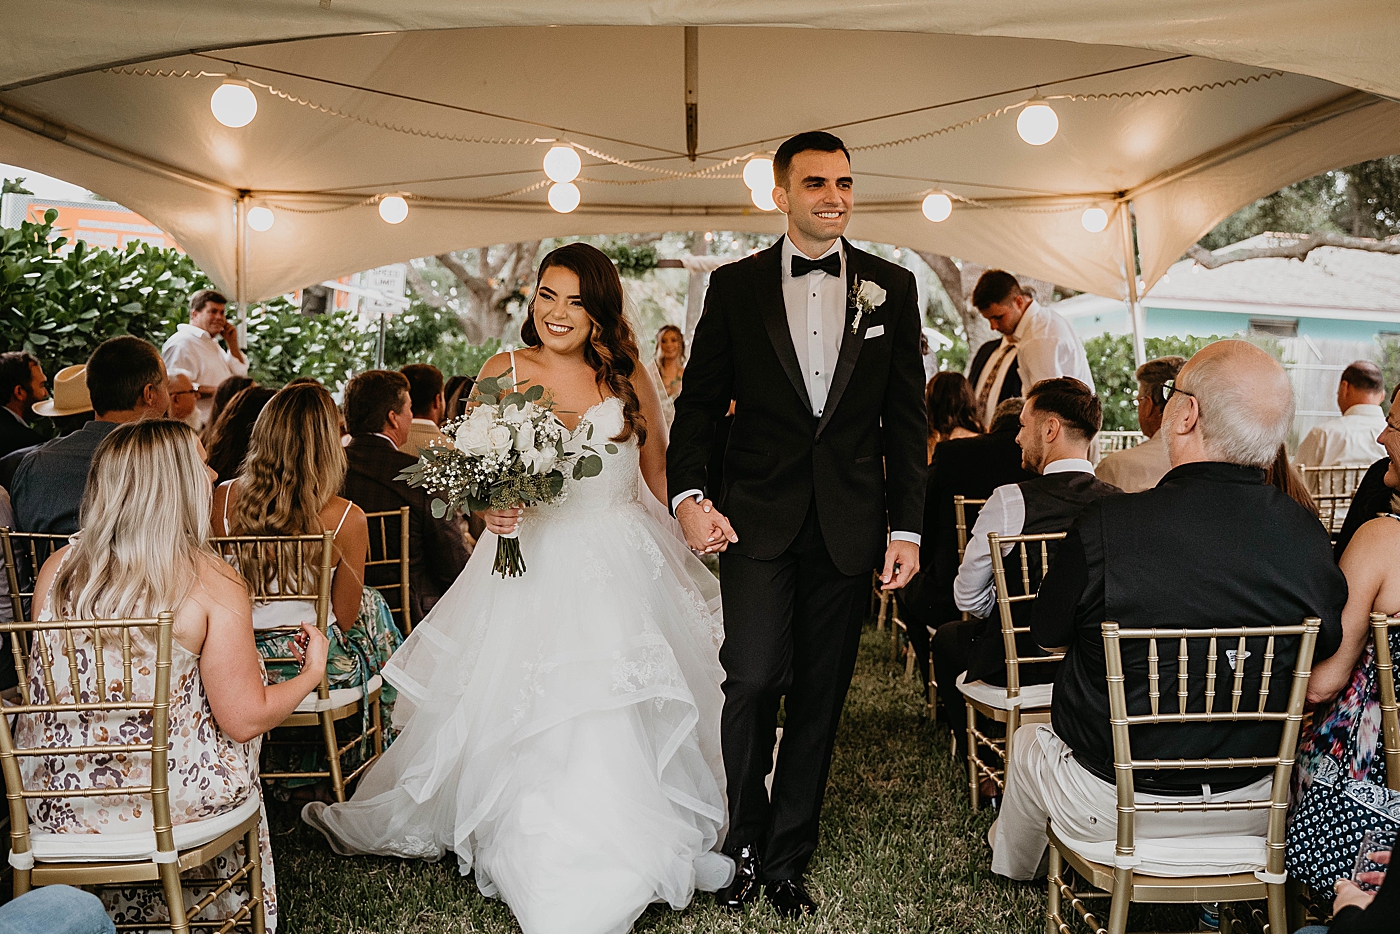 Bride and Groom going down the aisle Intimate South Florida Wedding Photography captured by Wedding Photographer Krystal Capone Photography